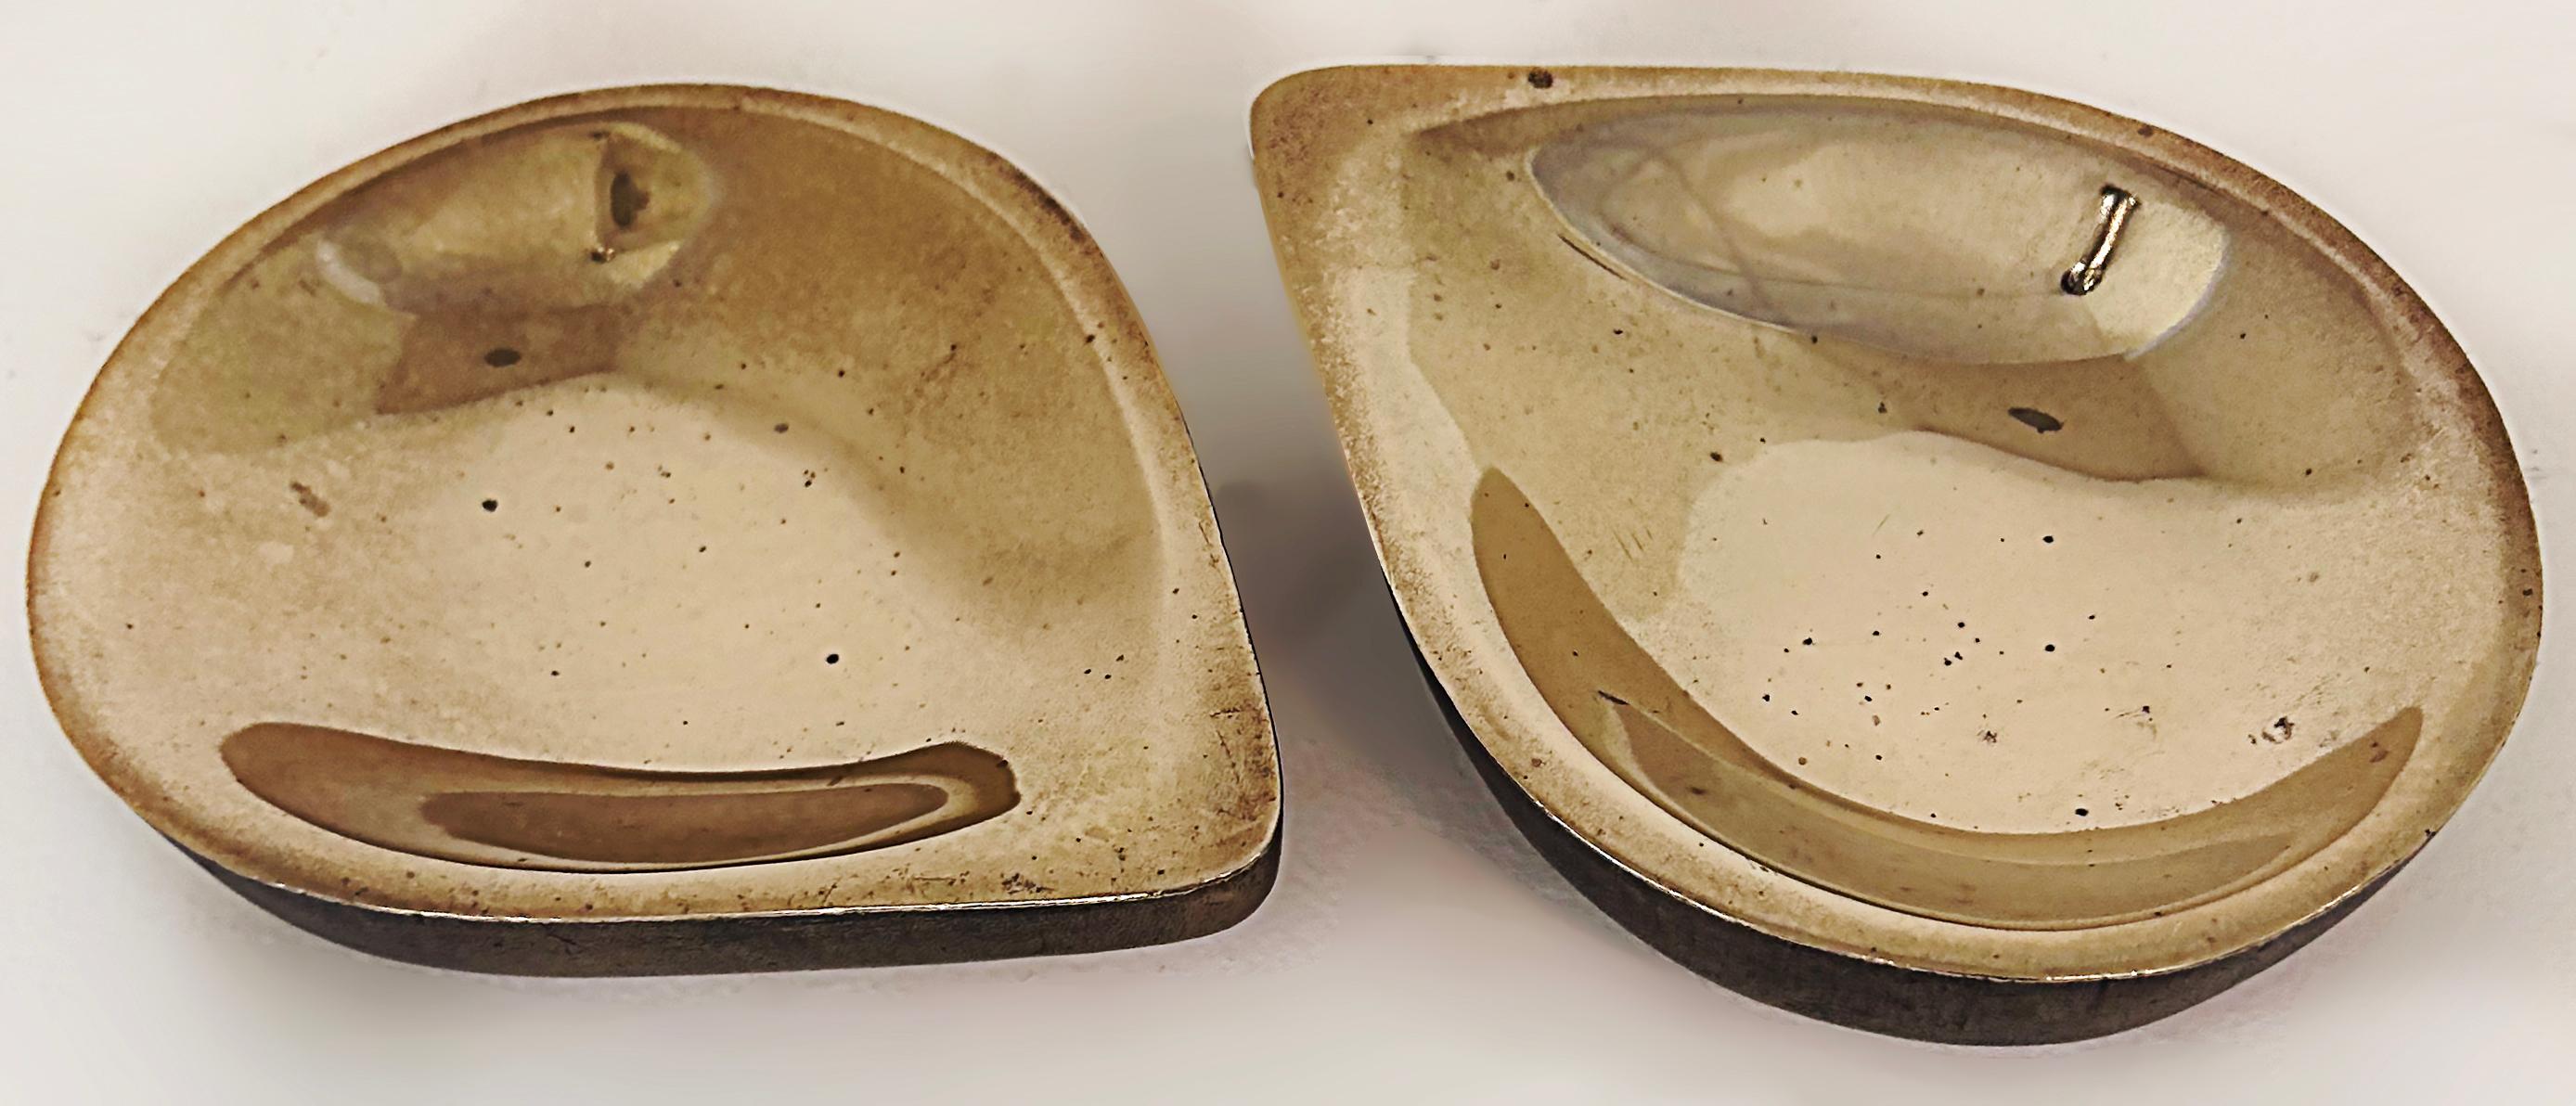 Steven Haulenbeek Ice Cast Bronze Teardrop Bowls, Heavy, Substantial Pair

Offered for sale is a pair of bras teardrop bowls by the American sculptural artist Steven Haulenbeek. The bowls are ice cast to create an interesting textural exterior